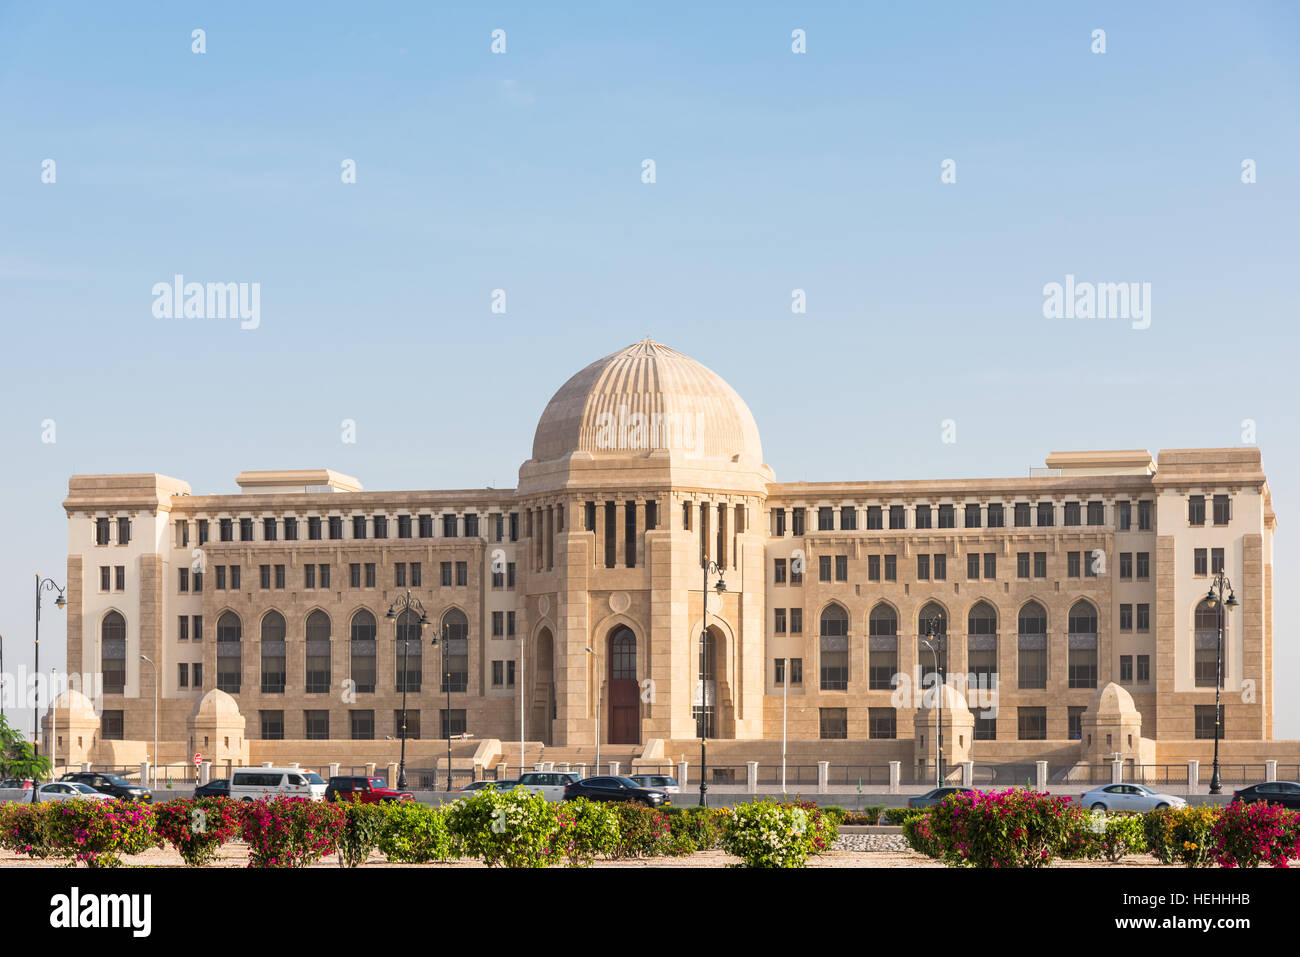 The Supreme Court of Oman in Muscat, The Sultanate of Oman. Cars in the foreground are blurred due to motion. Stock Photo